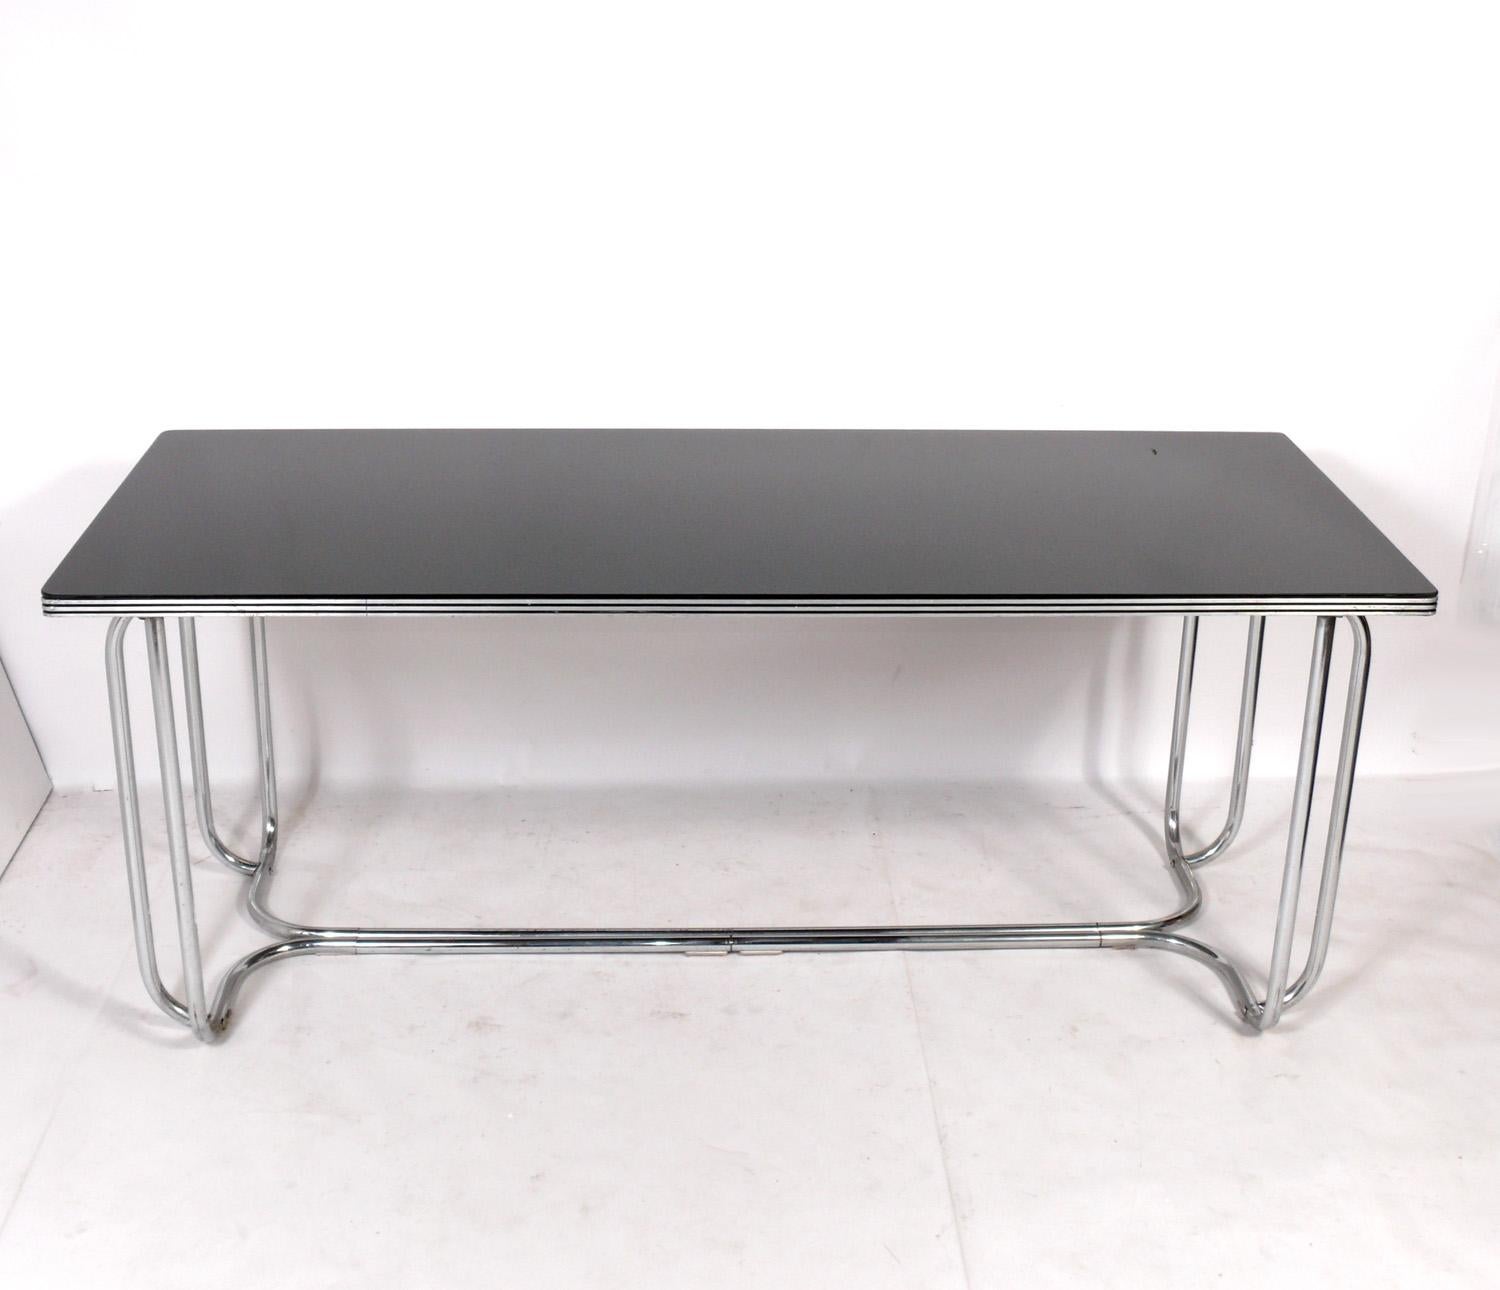 Streamlined Art Deco dining table, designed by Wolfgang Hoffmann for Howell, American, circa 1930s. Chrome plated metal frame with sleek black glass top. Please see our other 1stdibs listings for the Hoffmann dining chairs from the same estate. See